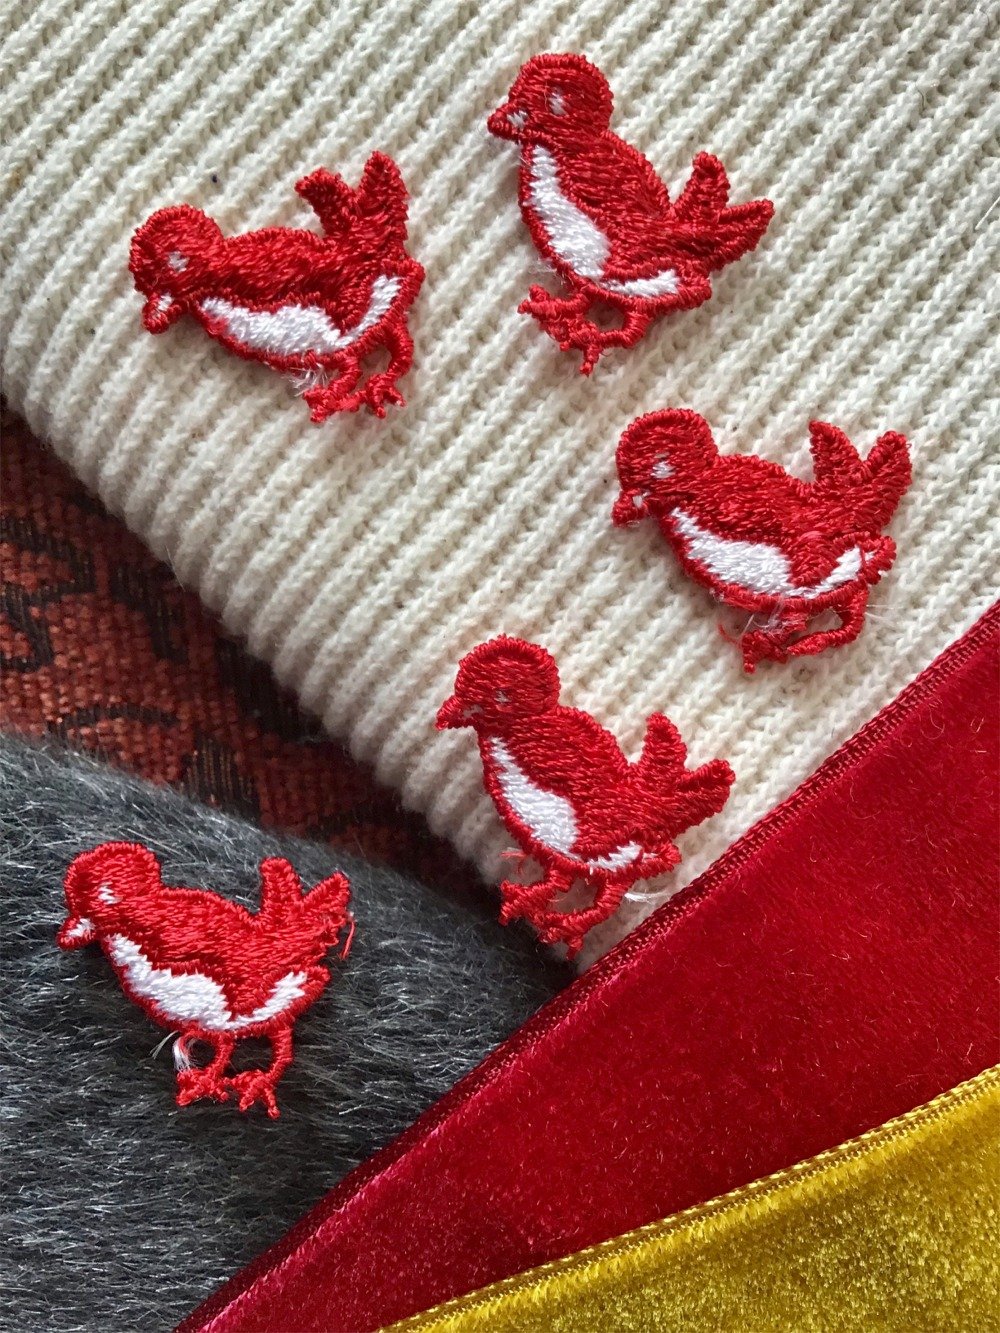 Decorative Red White Bird Vintage Embroidery Applique Patch #5098